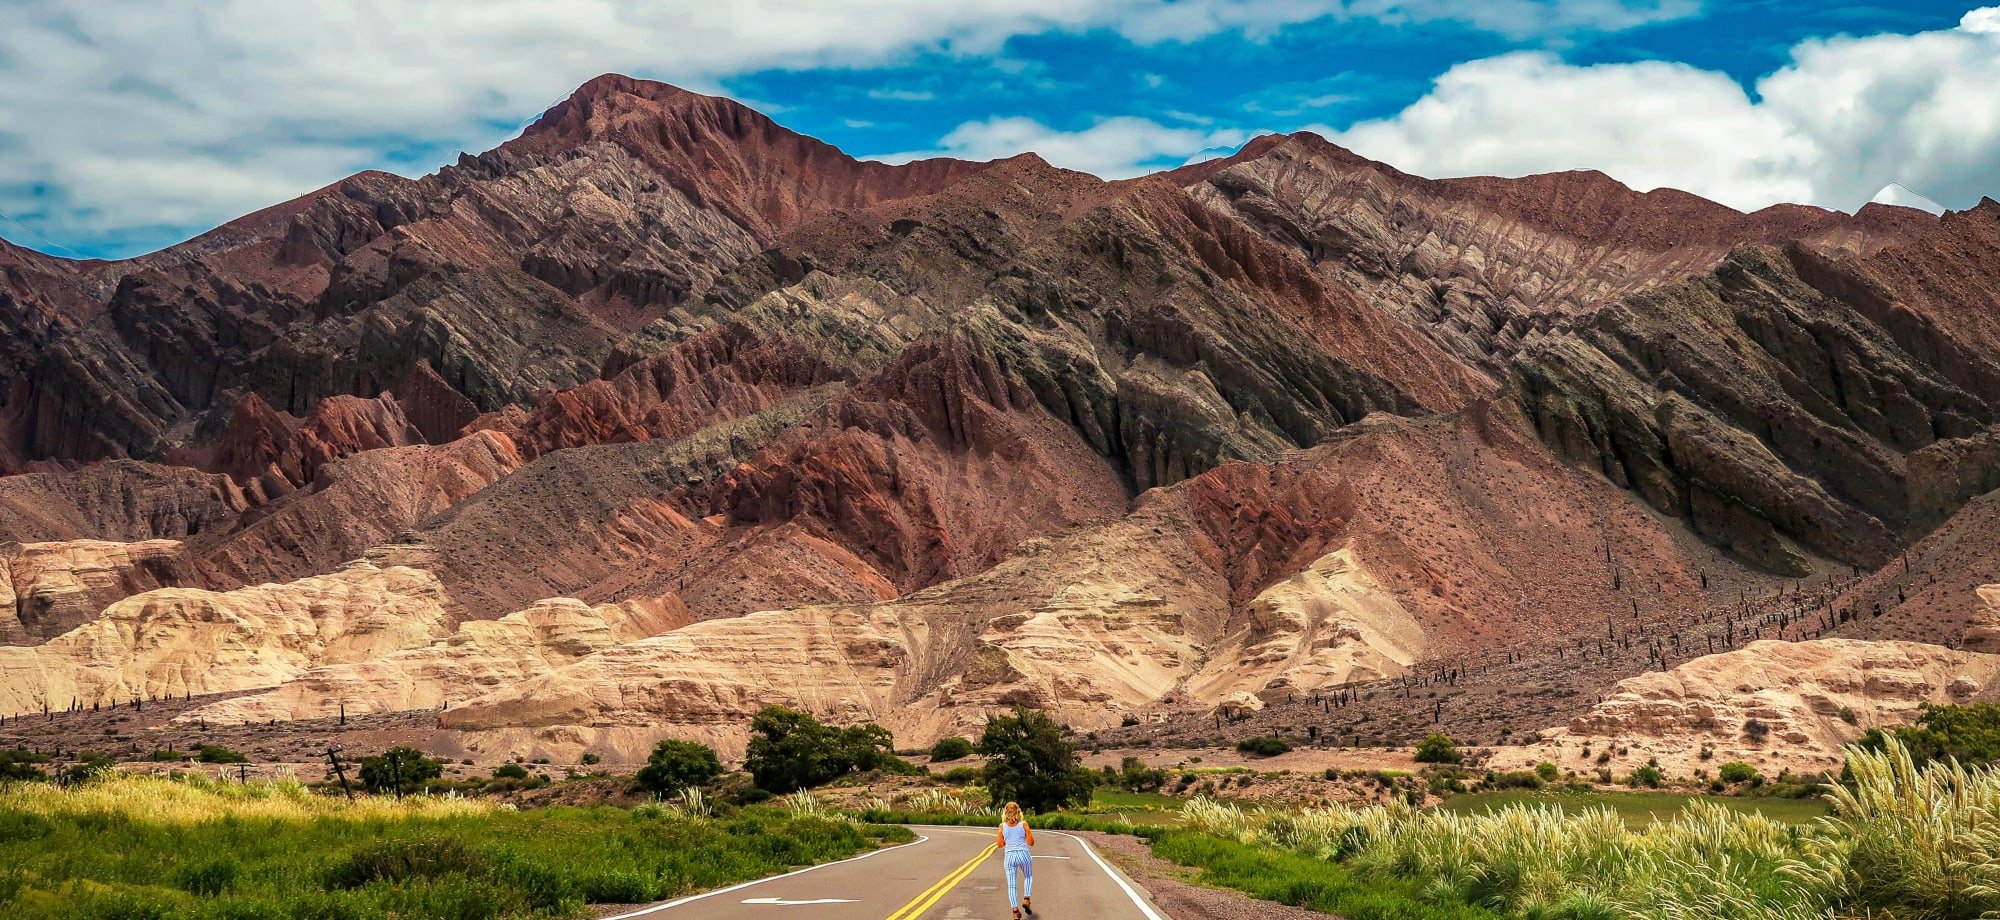 A woman is walking in the middle of a road with layers of of red-brown mountains in the background, taking up most of the sky.